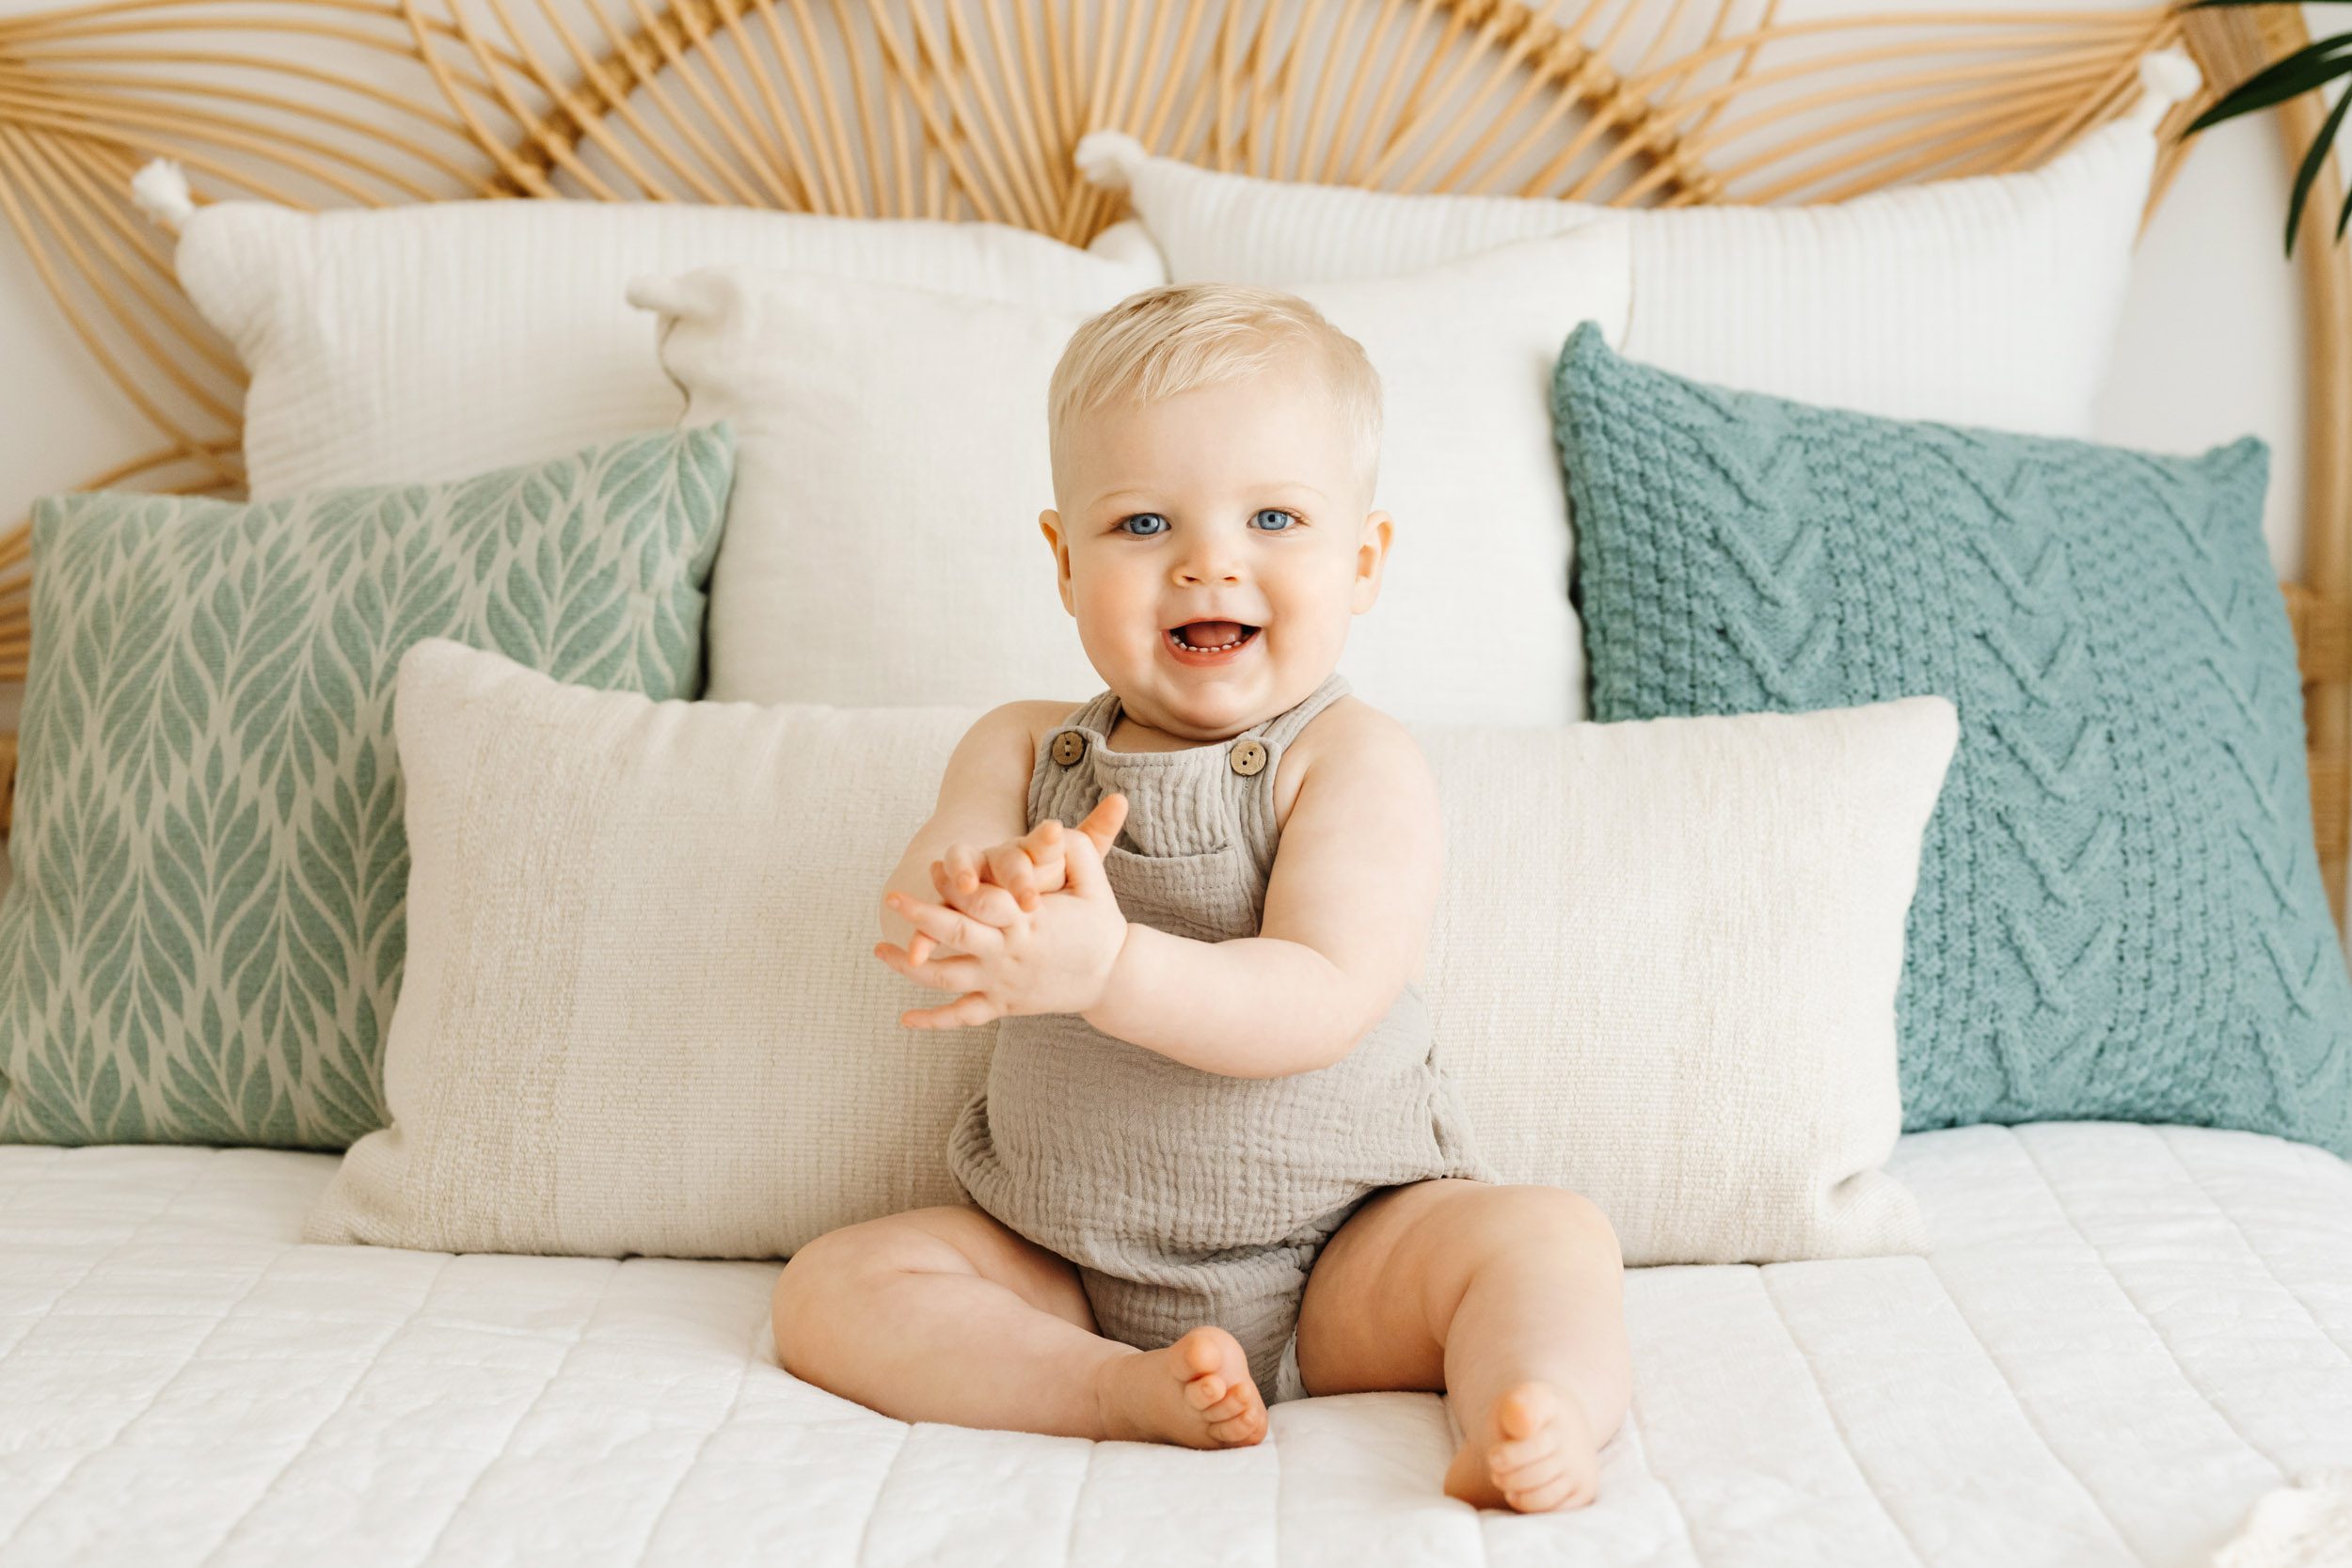 a little boy sitting on a bed and laughing as he claps his hands together during a first birthday photography session